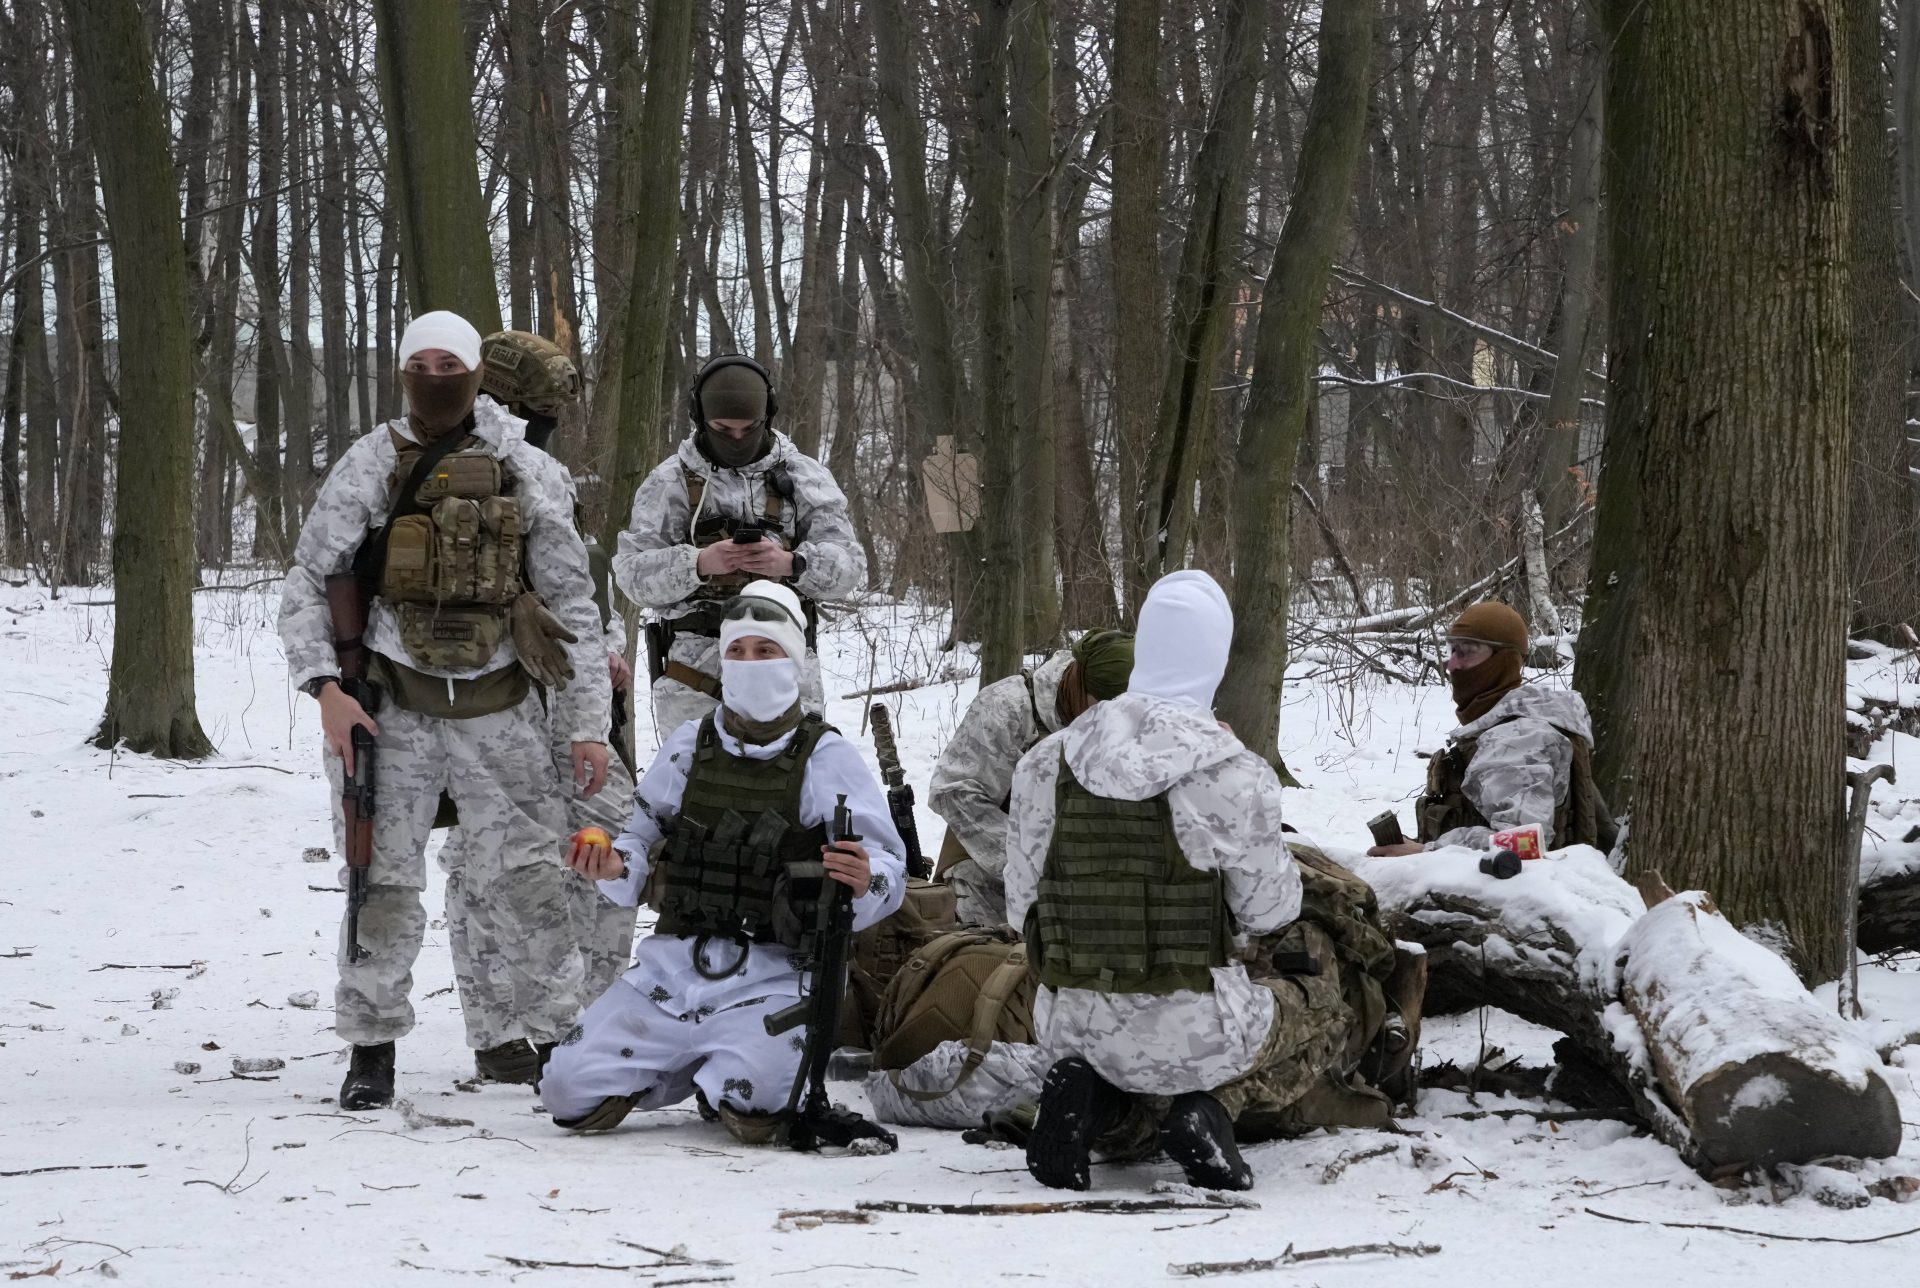 Members of Ukraine's Territorial Defense Forces, volunteer military units of the Armed Forces, train in a city park in Kyiv, Ukraine, Saturday, Jan. 22, 2022.